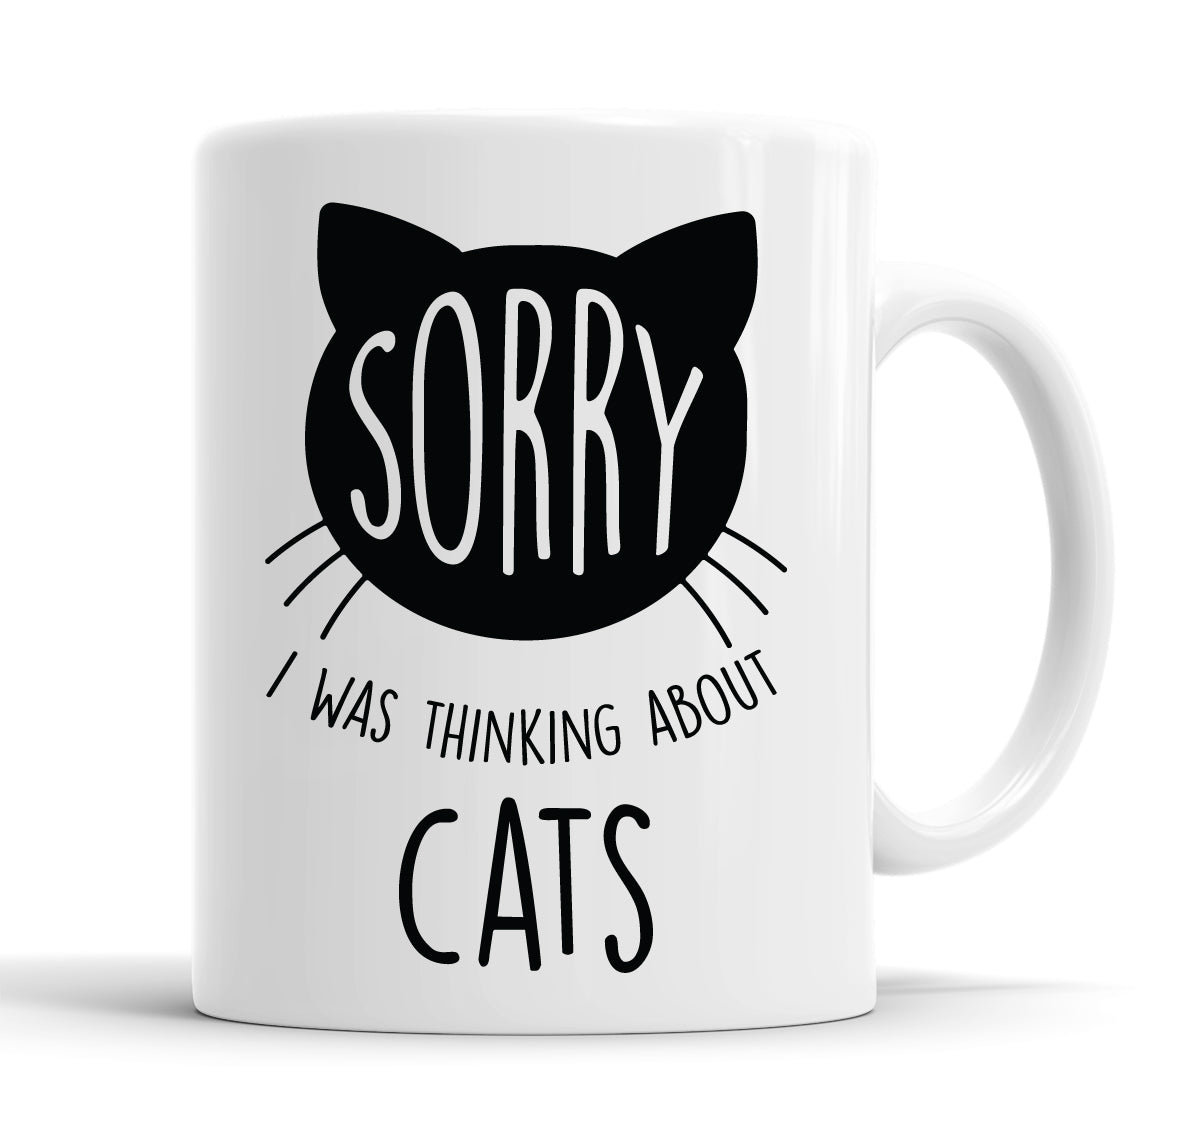 Sorry, I Was Thinking About Cats Funny Slogan Mug Tea Cup Coffee